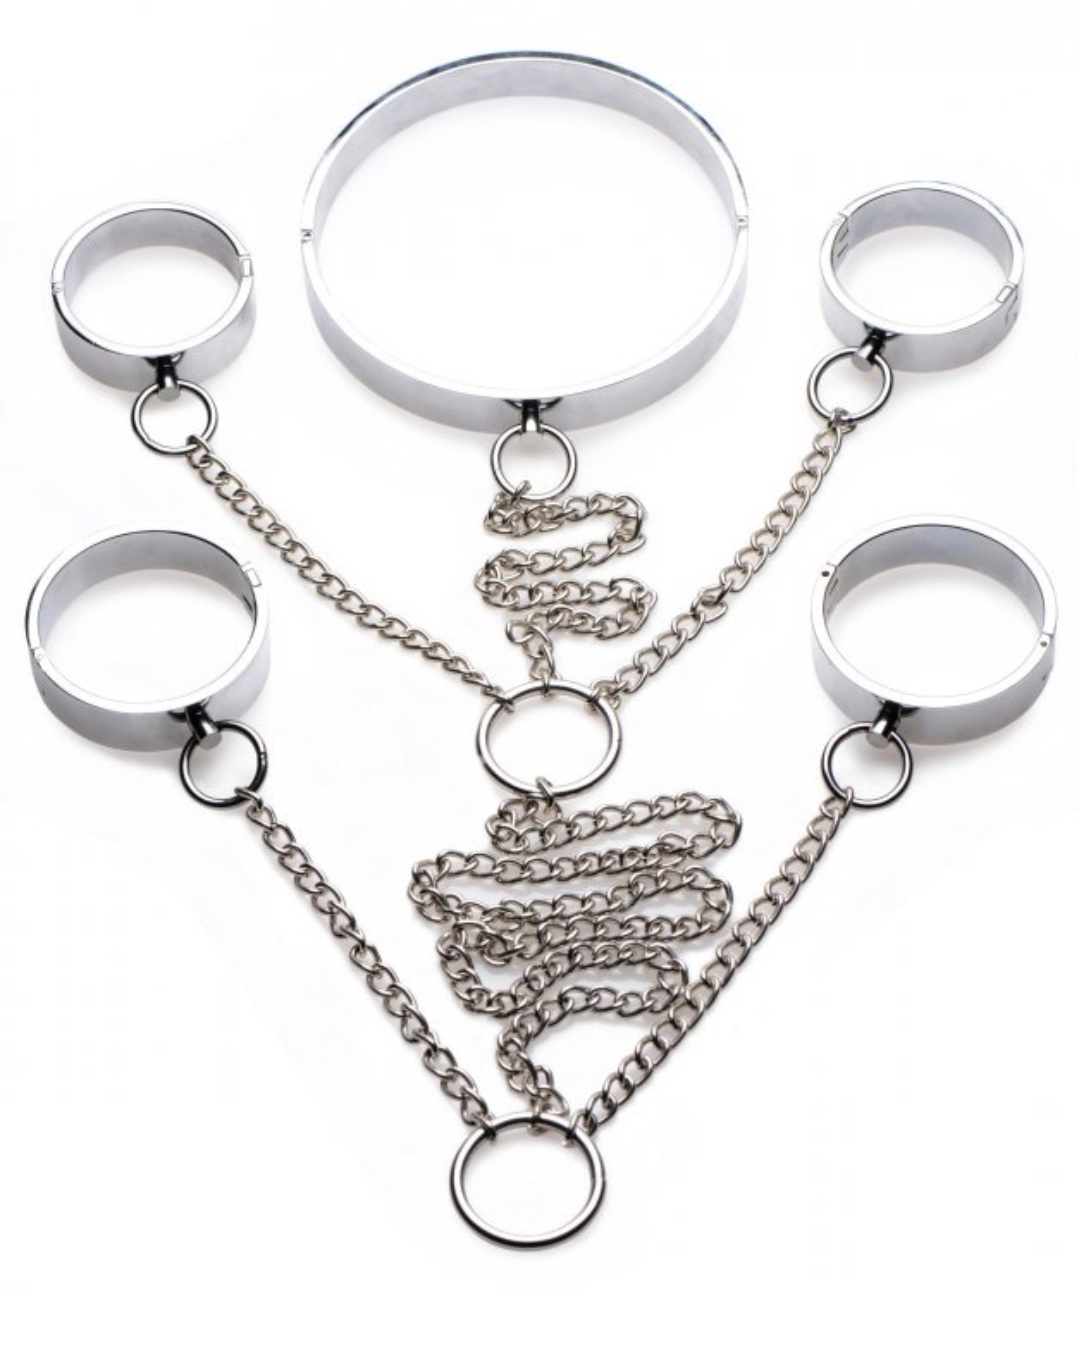 5 Piece Stainless Steel Shackle Set (Small)